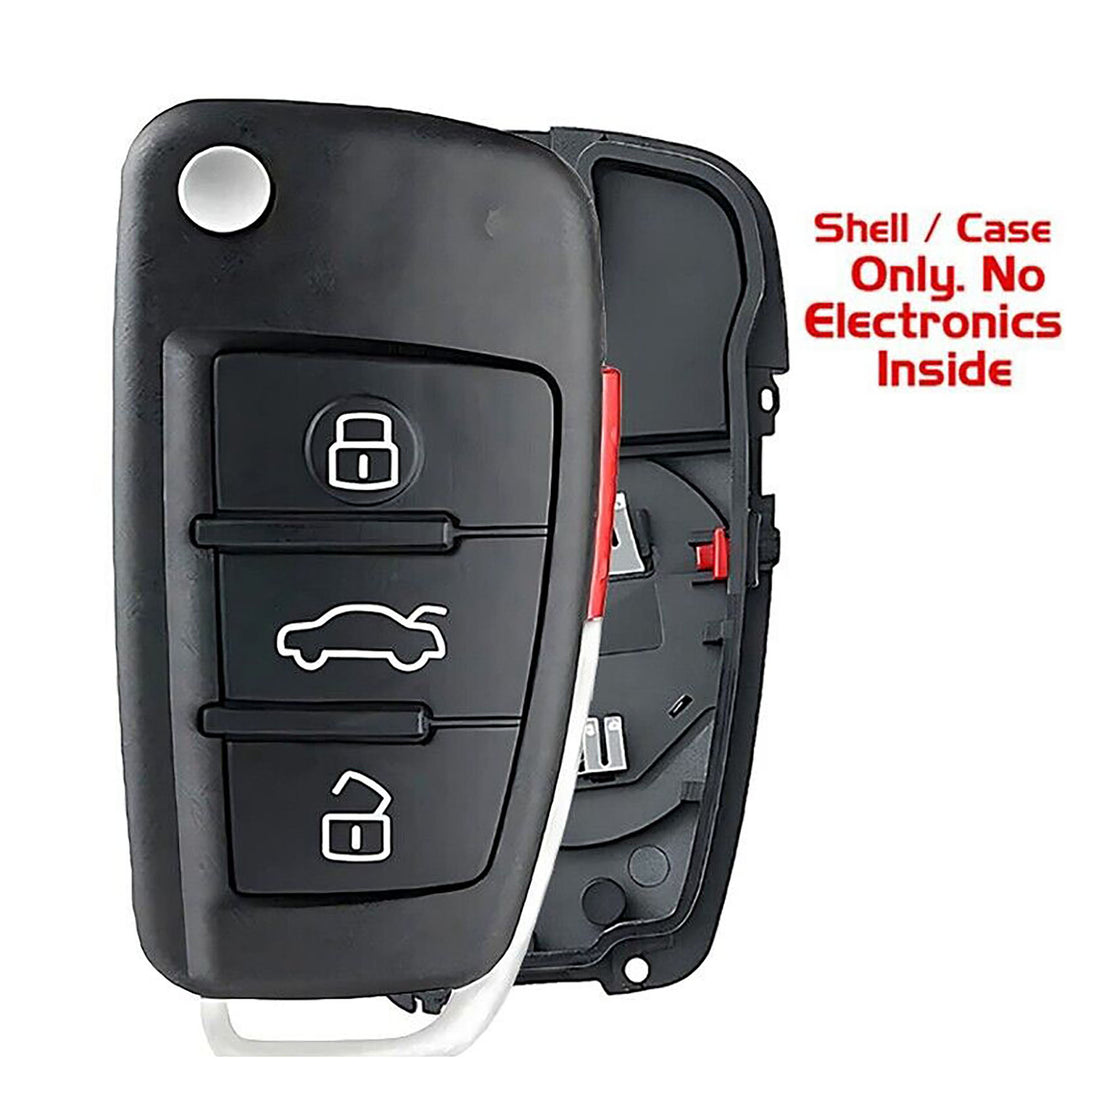 1x New Quality Replacement Key Fob Remote SHELL / CASE Compatible with & Fit For Audi Vehicles - MPN NBG009272T-02 (NO electronics or Chip inside)